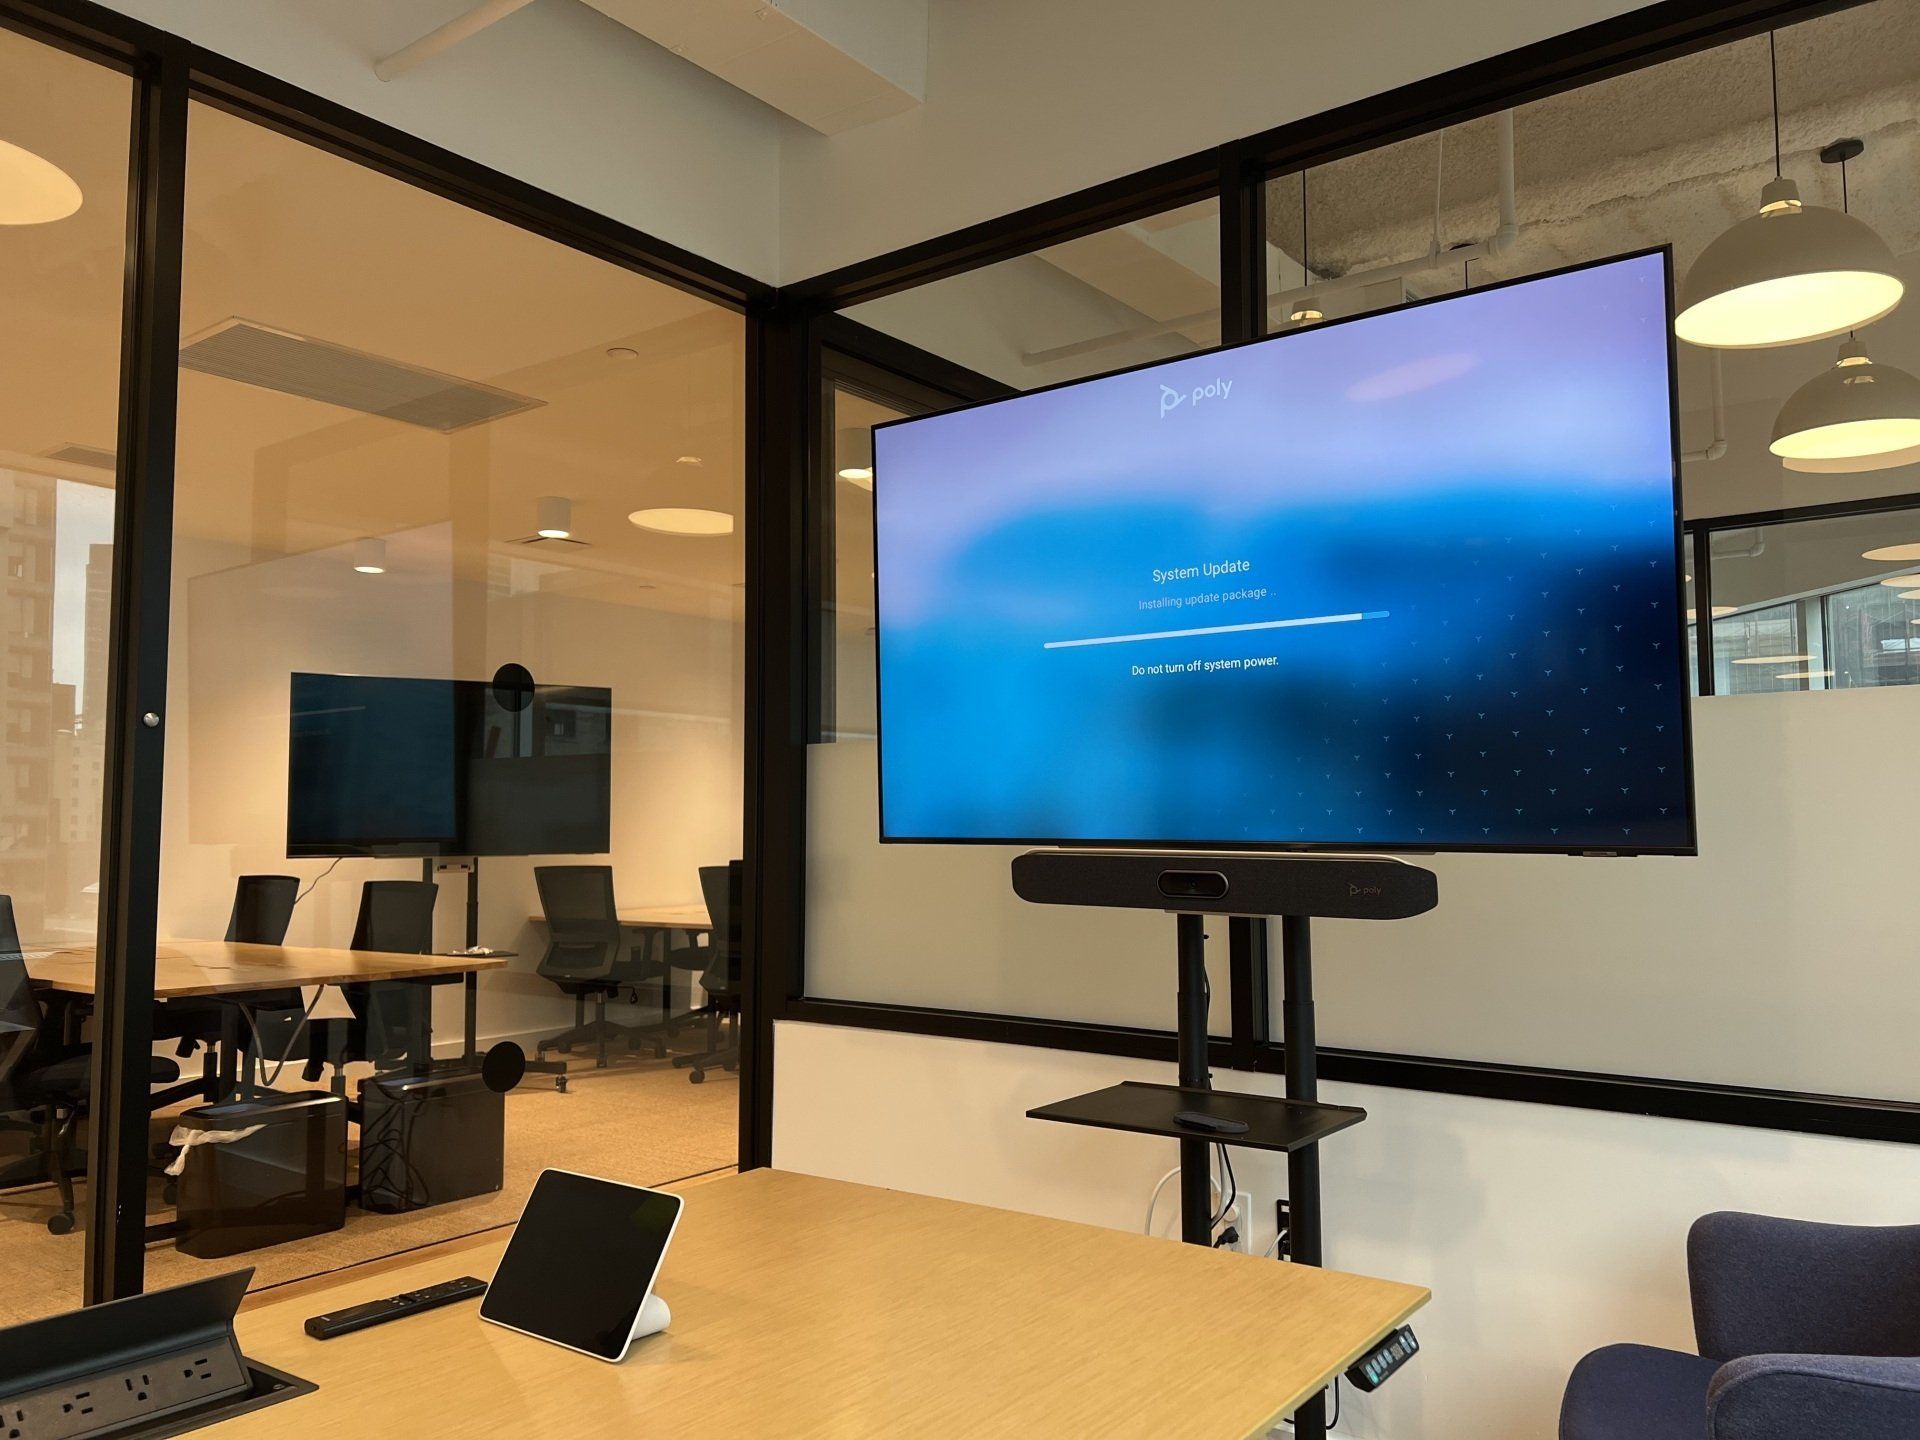 A conference room with a large flat screen tv on a stand